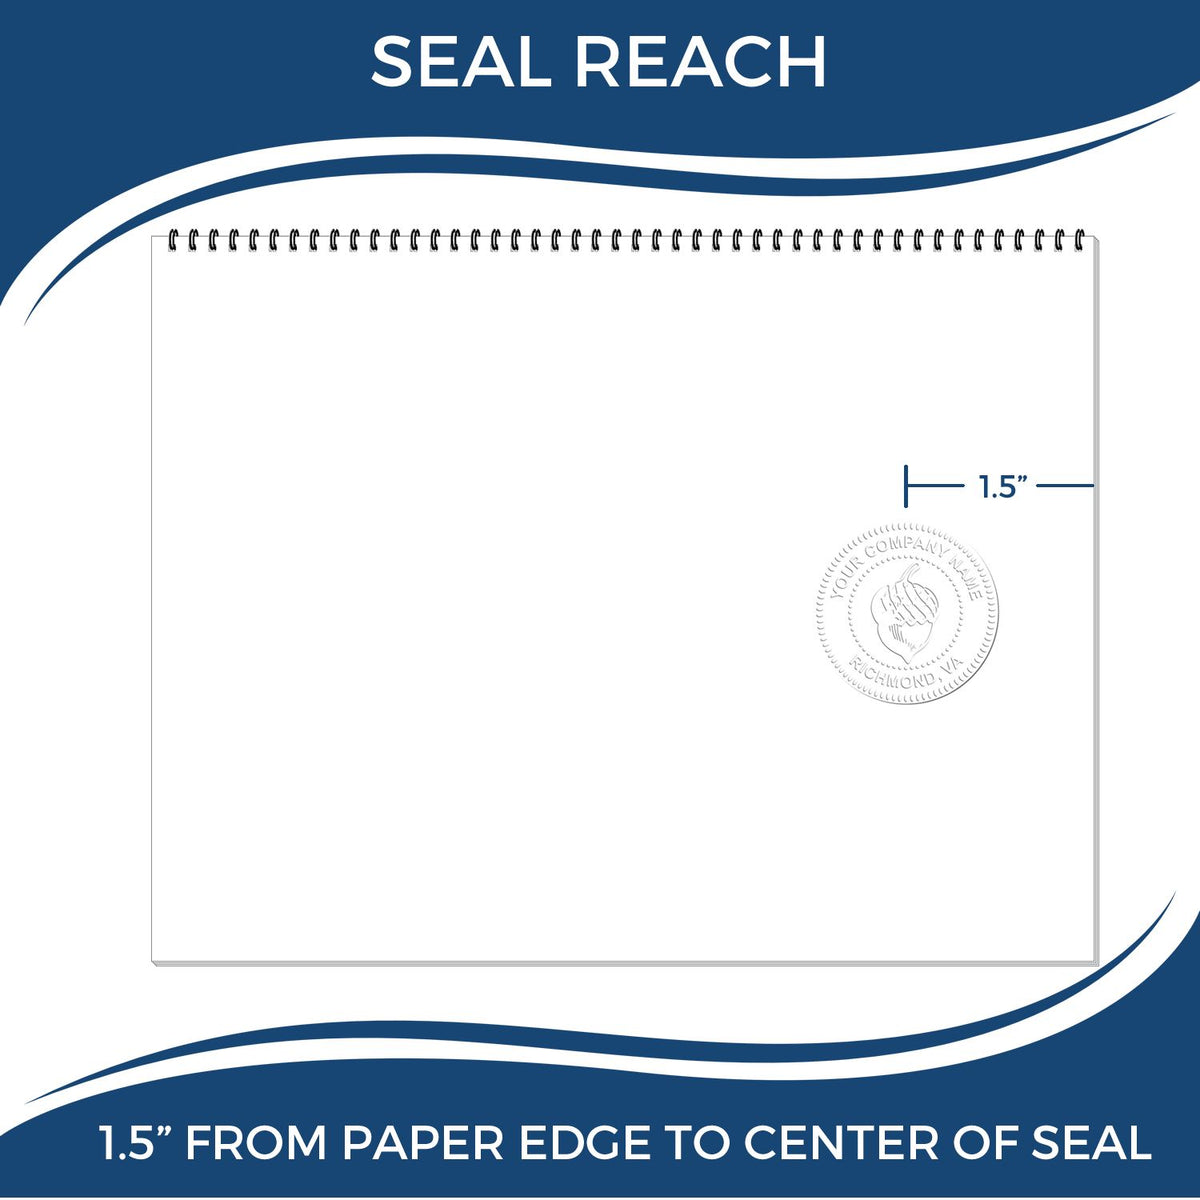 An infographic showing the seal reach which is represented by a ruler and a miniature seal image of the Soft Pocket South Dakota Landscape Architect Embosser